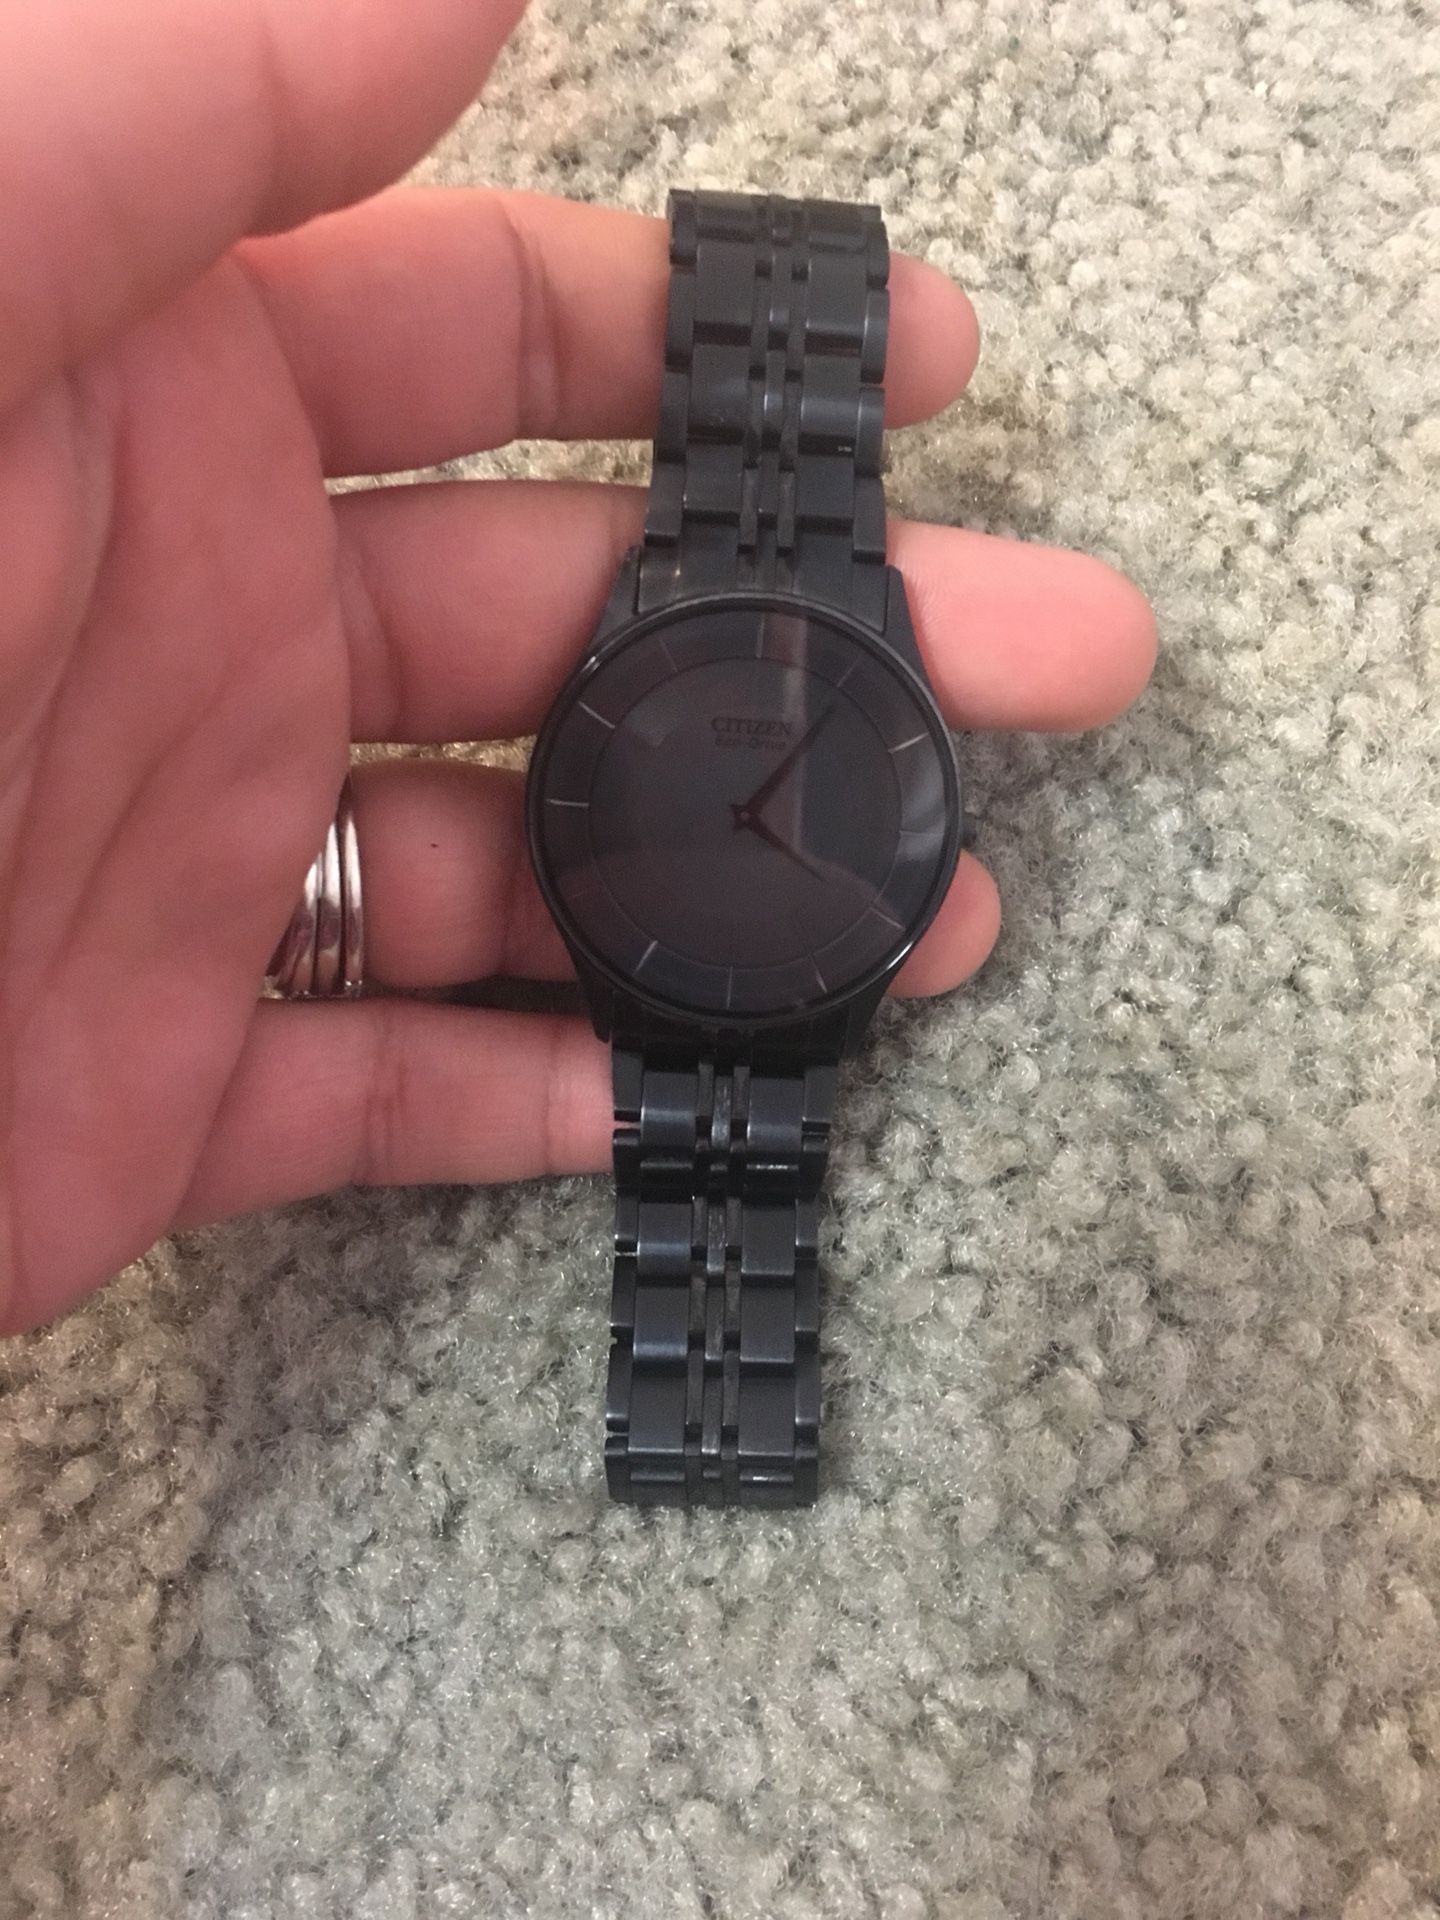 Men’s Citizen All Black EcoDrive Watch (Less than 2 years old